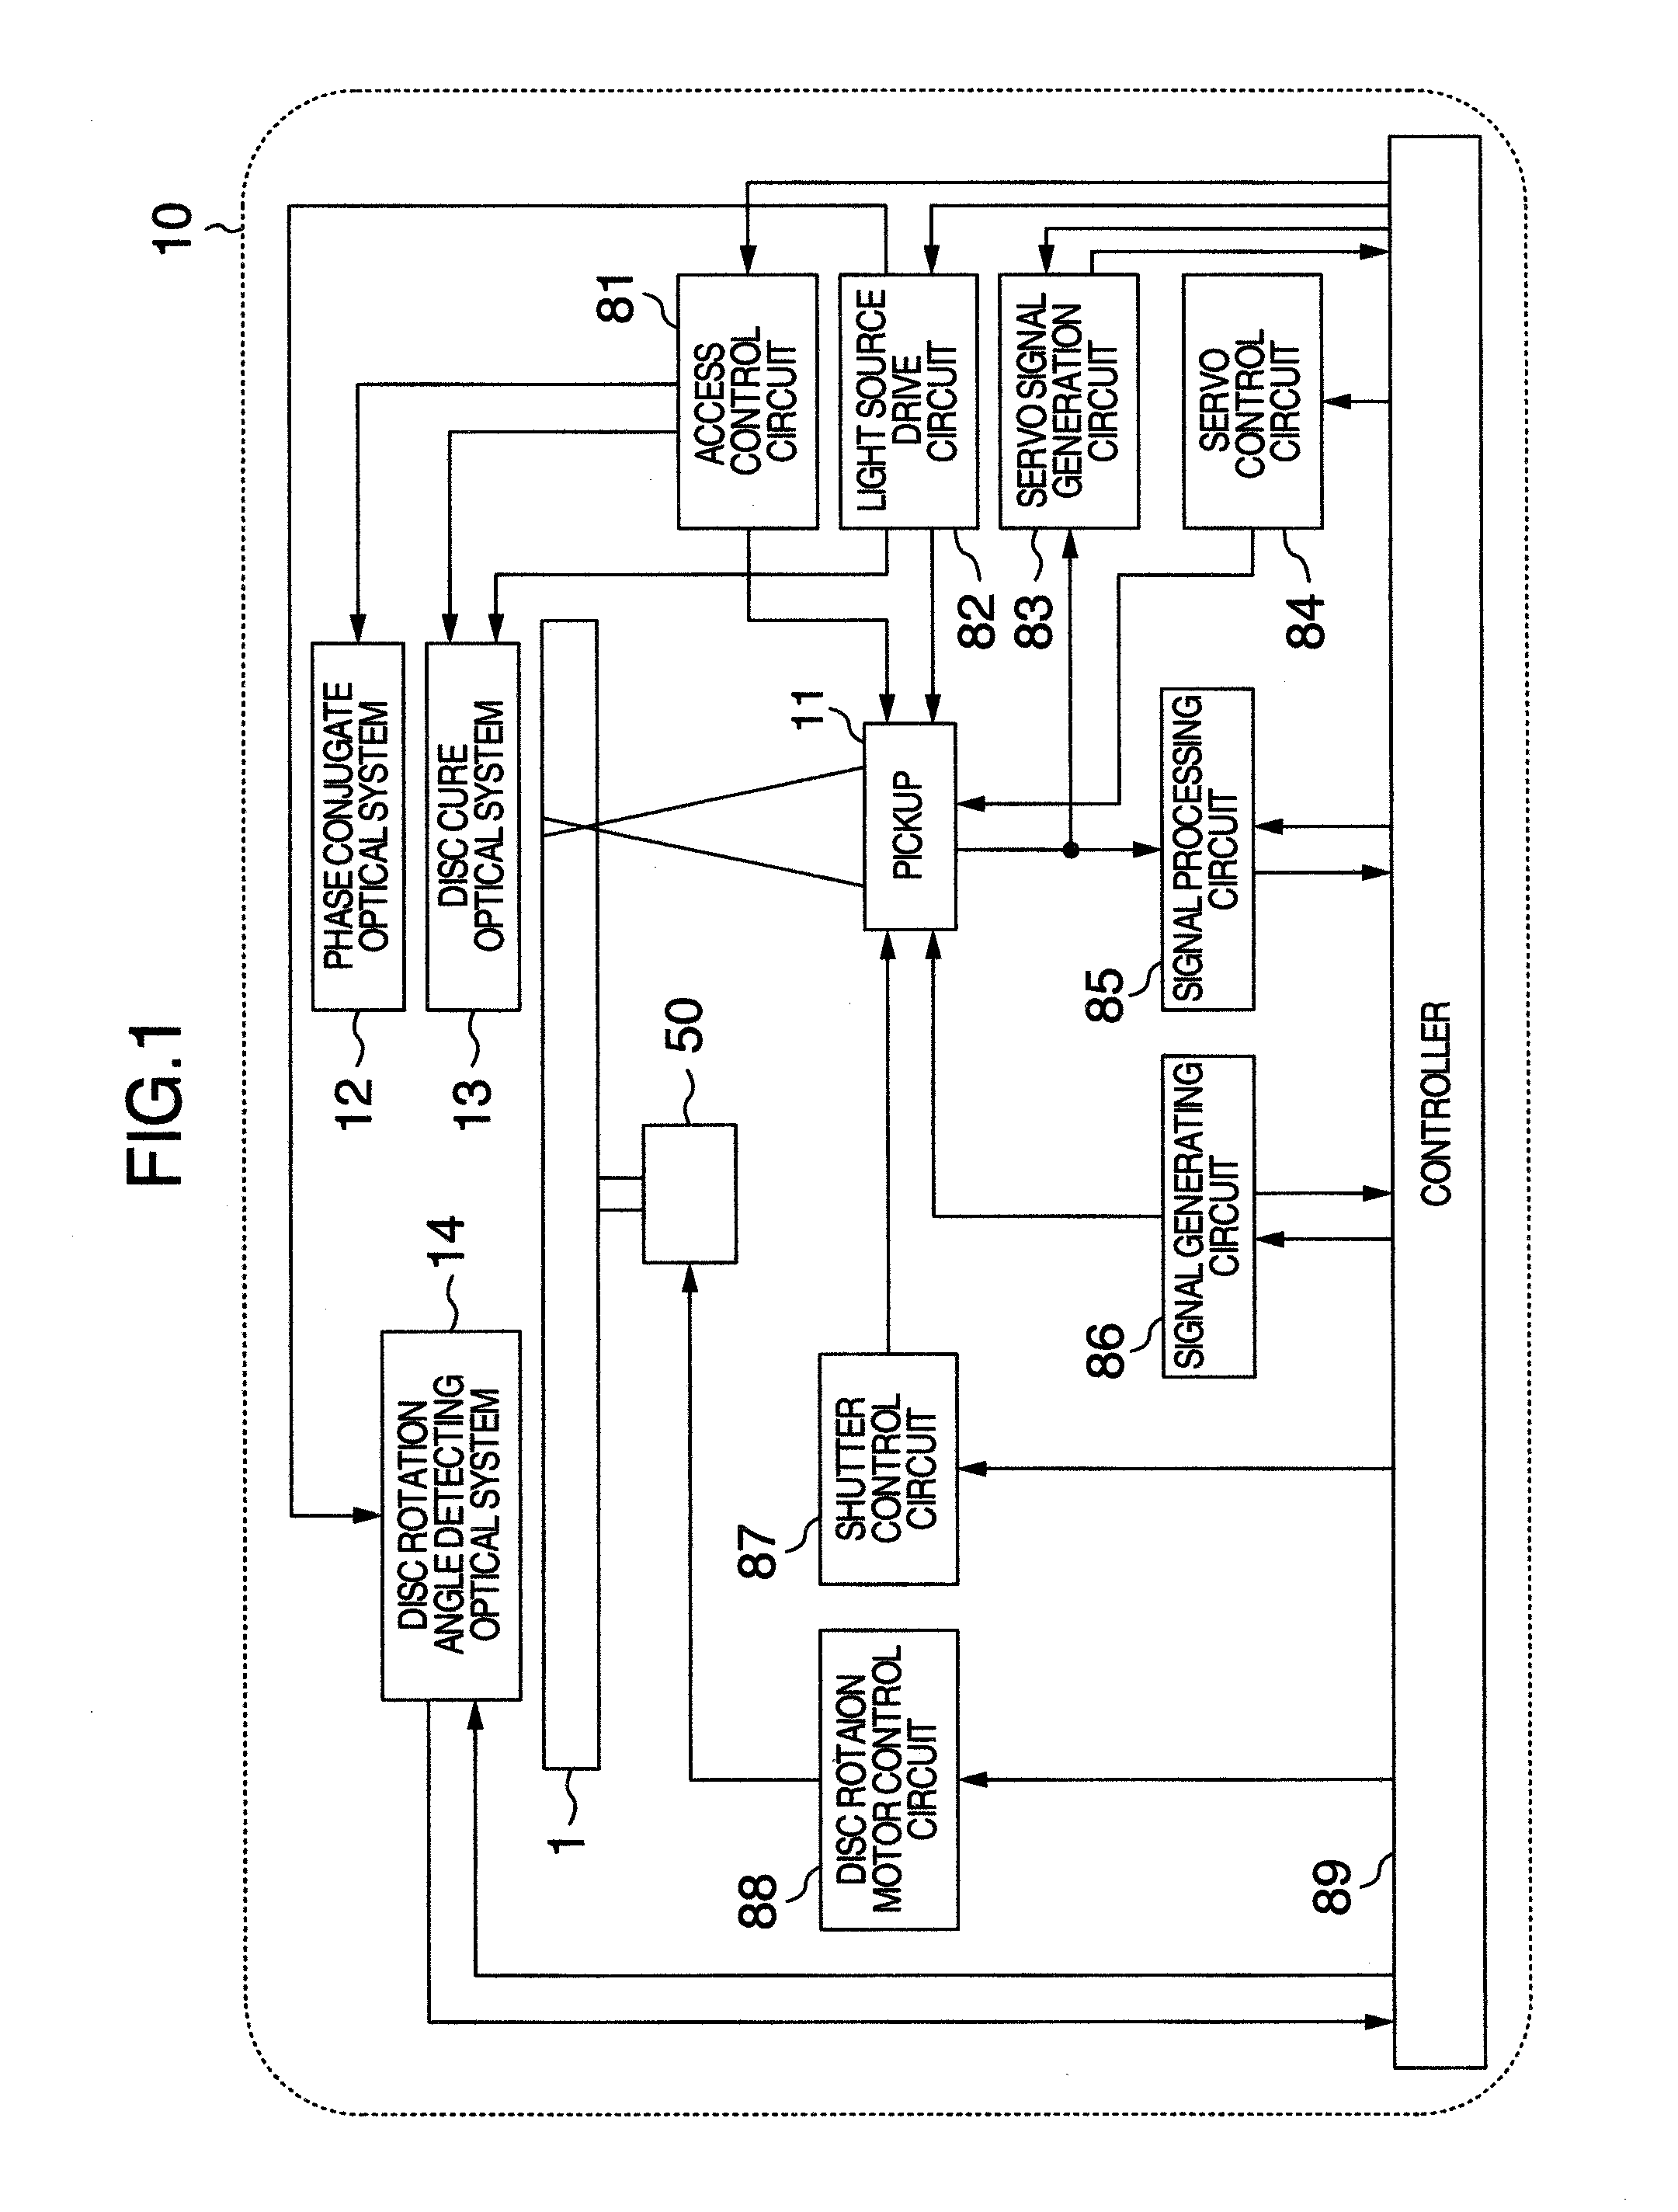 Optical information reproducing method and optical information reproducing apparatus